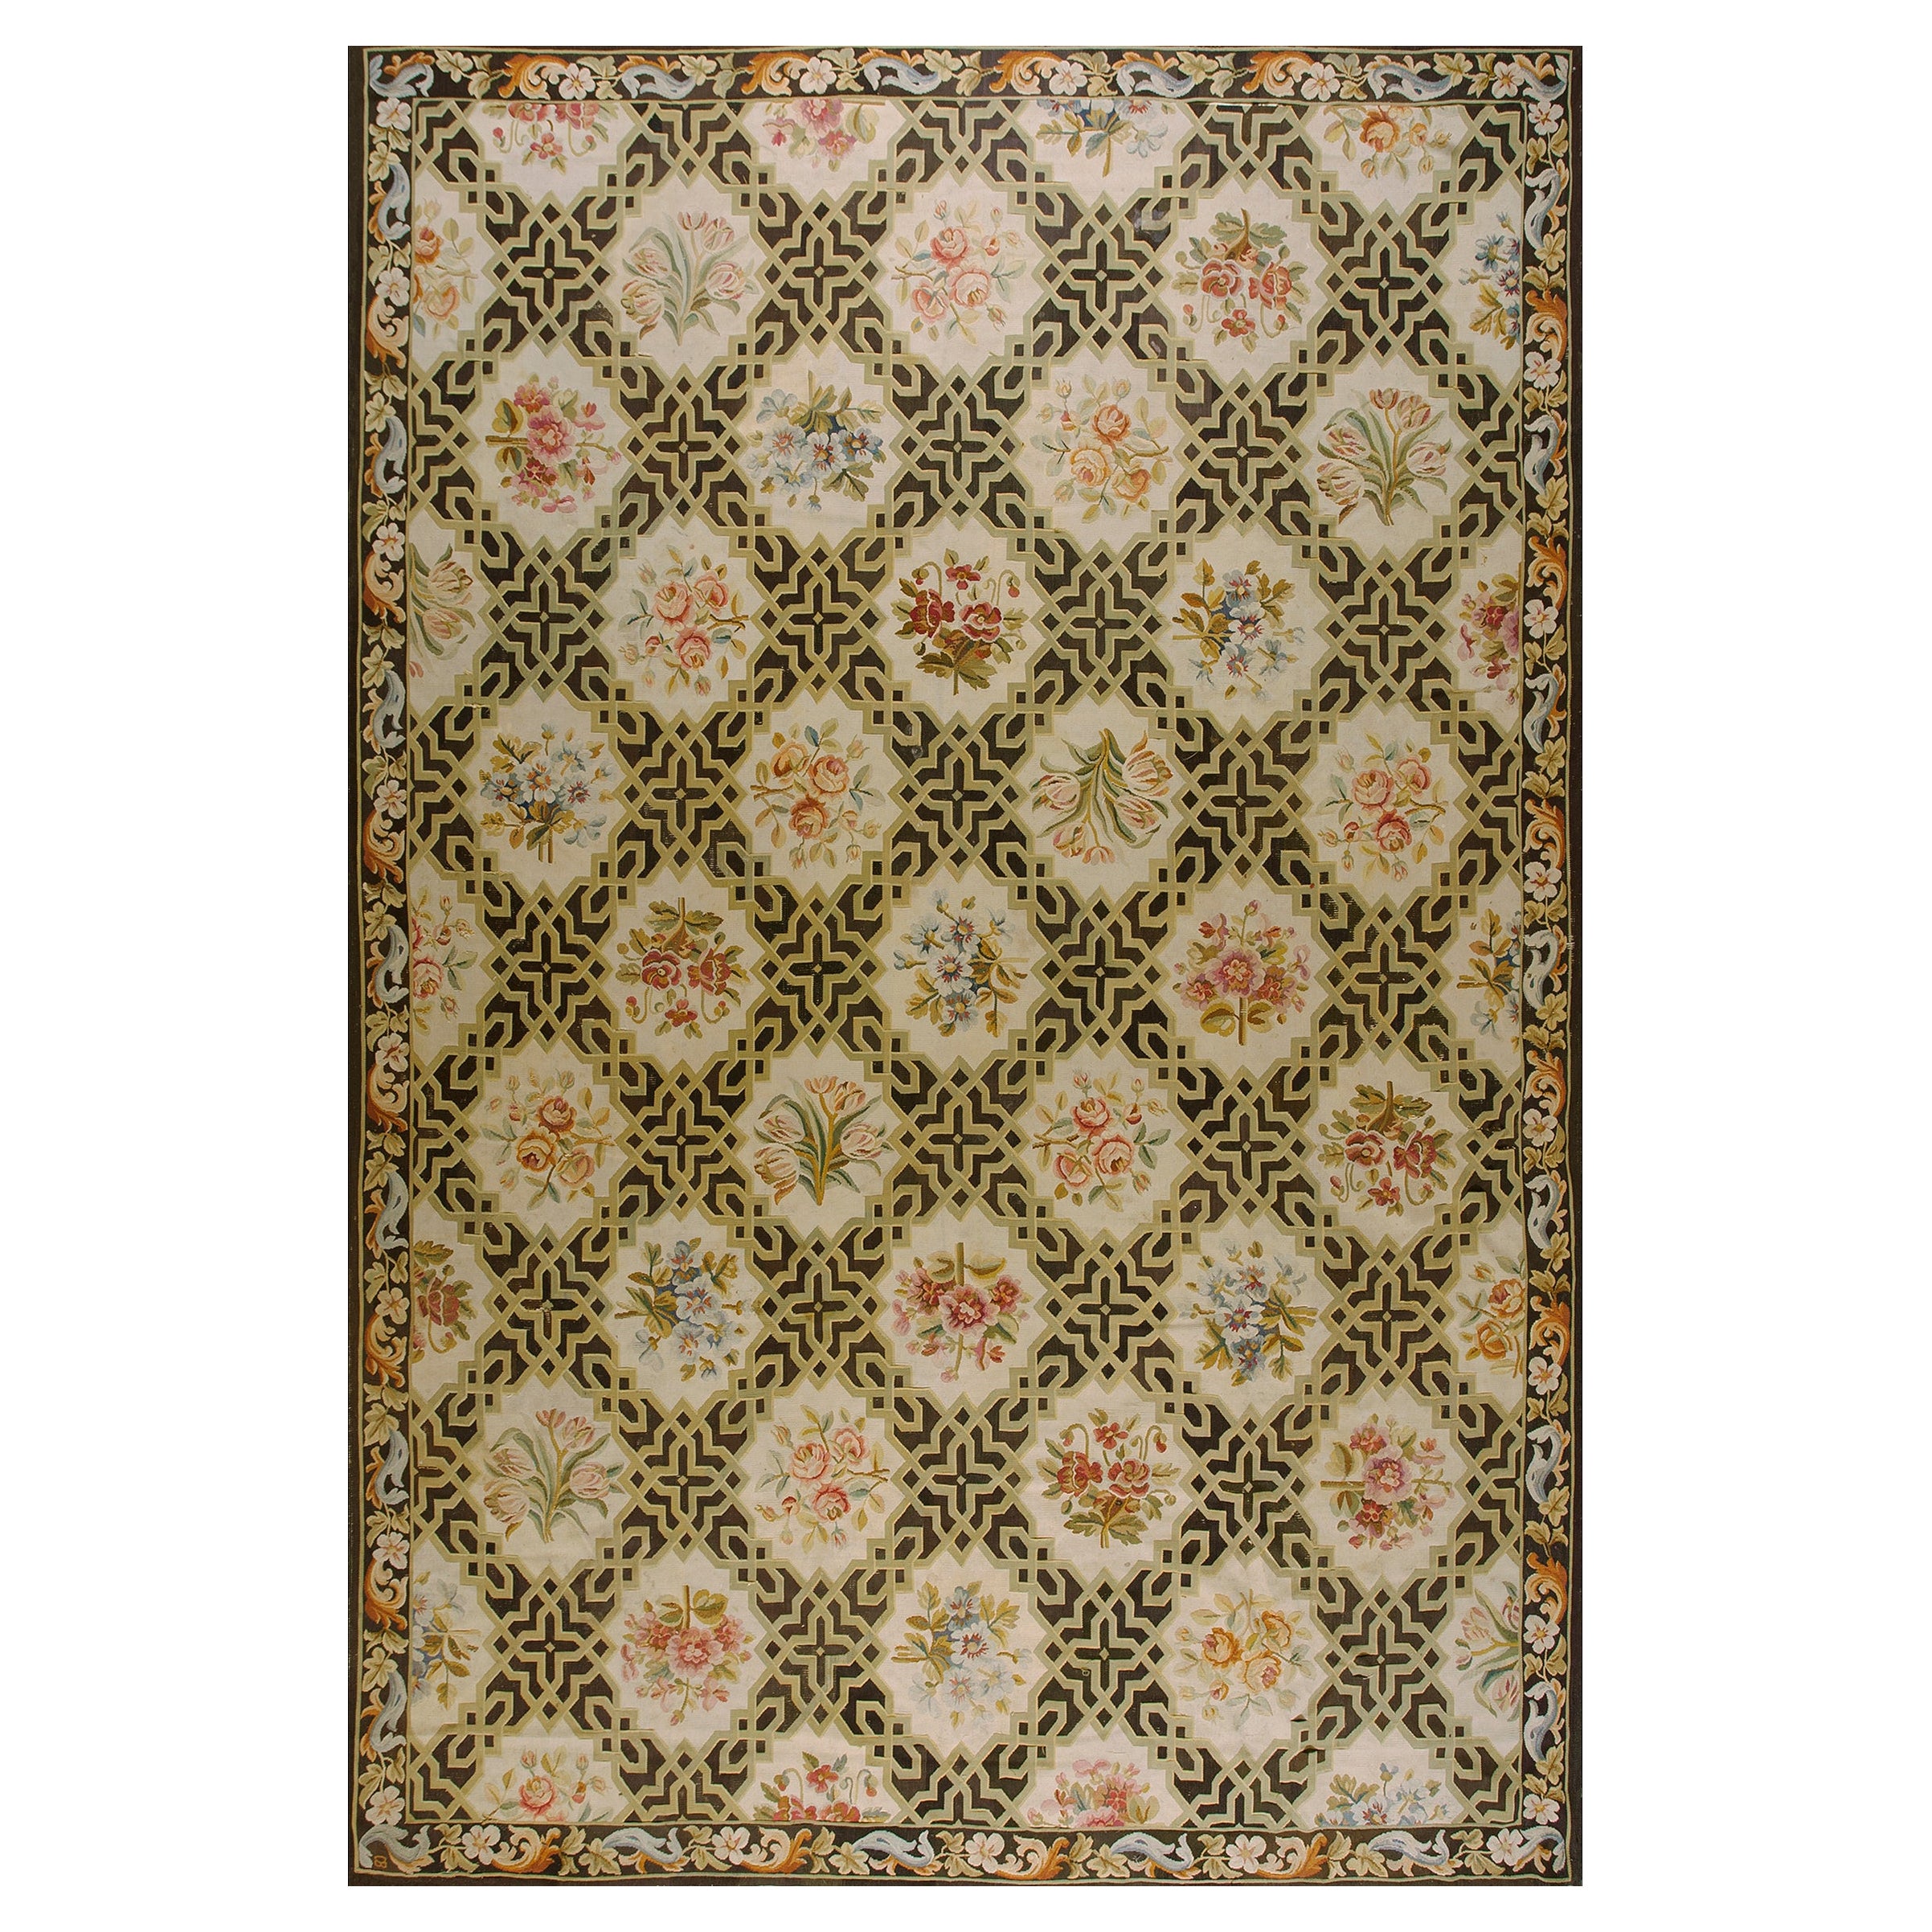 Early 20th Century French Aubusson Carpet ( 9' 8'' x 15' 3'' - 295 x 465 cm ) For Sale